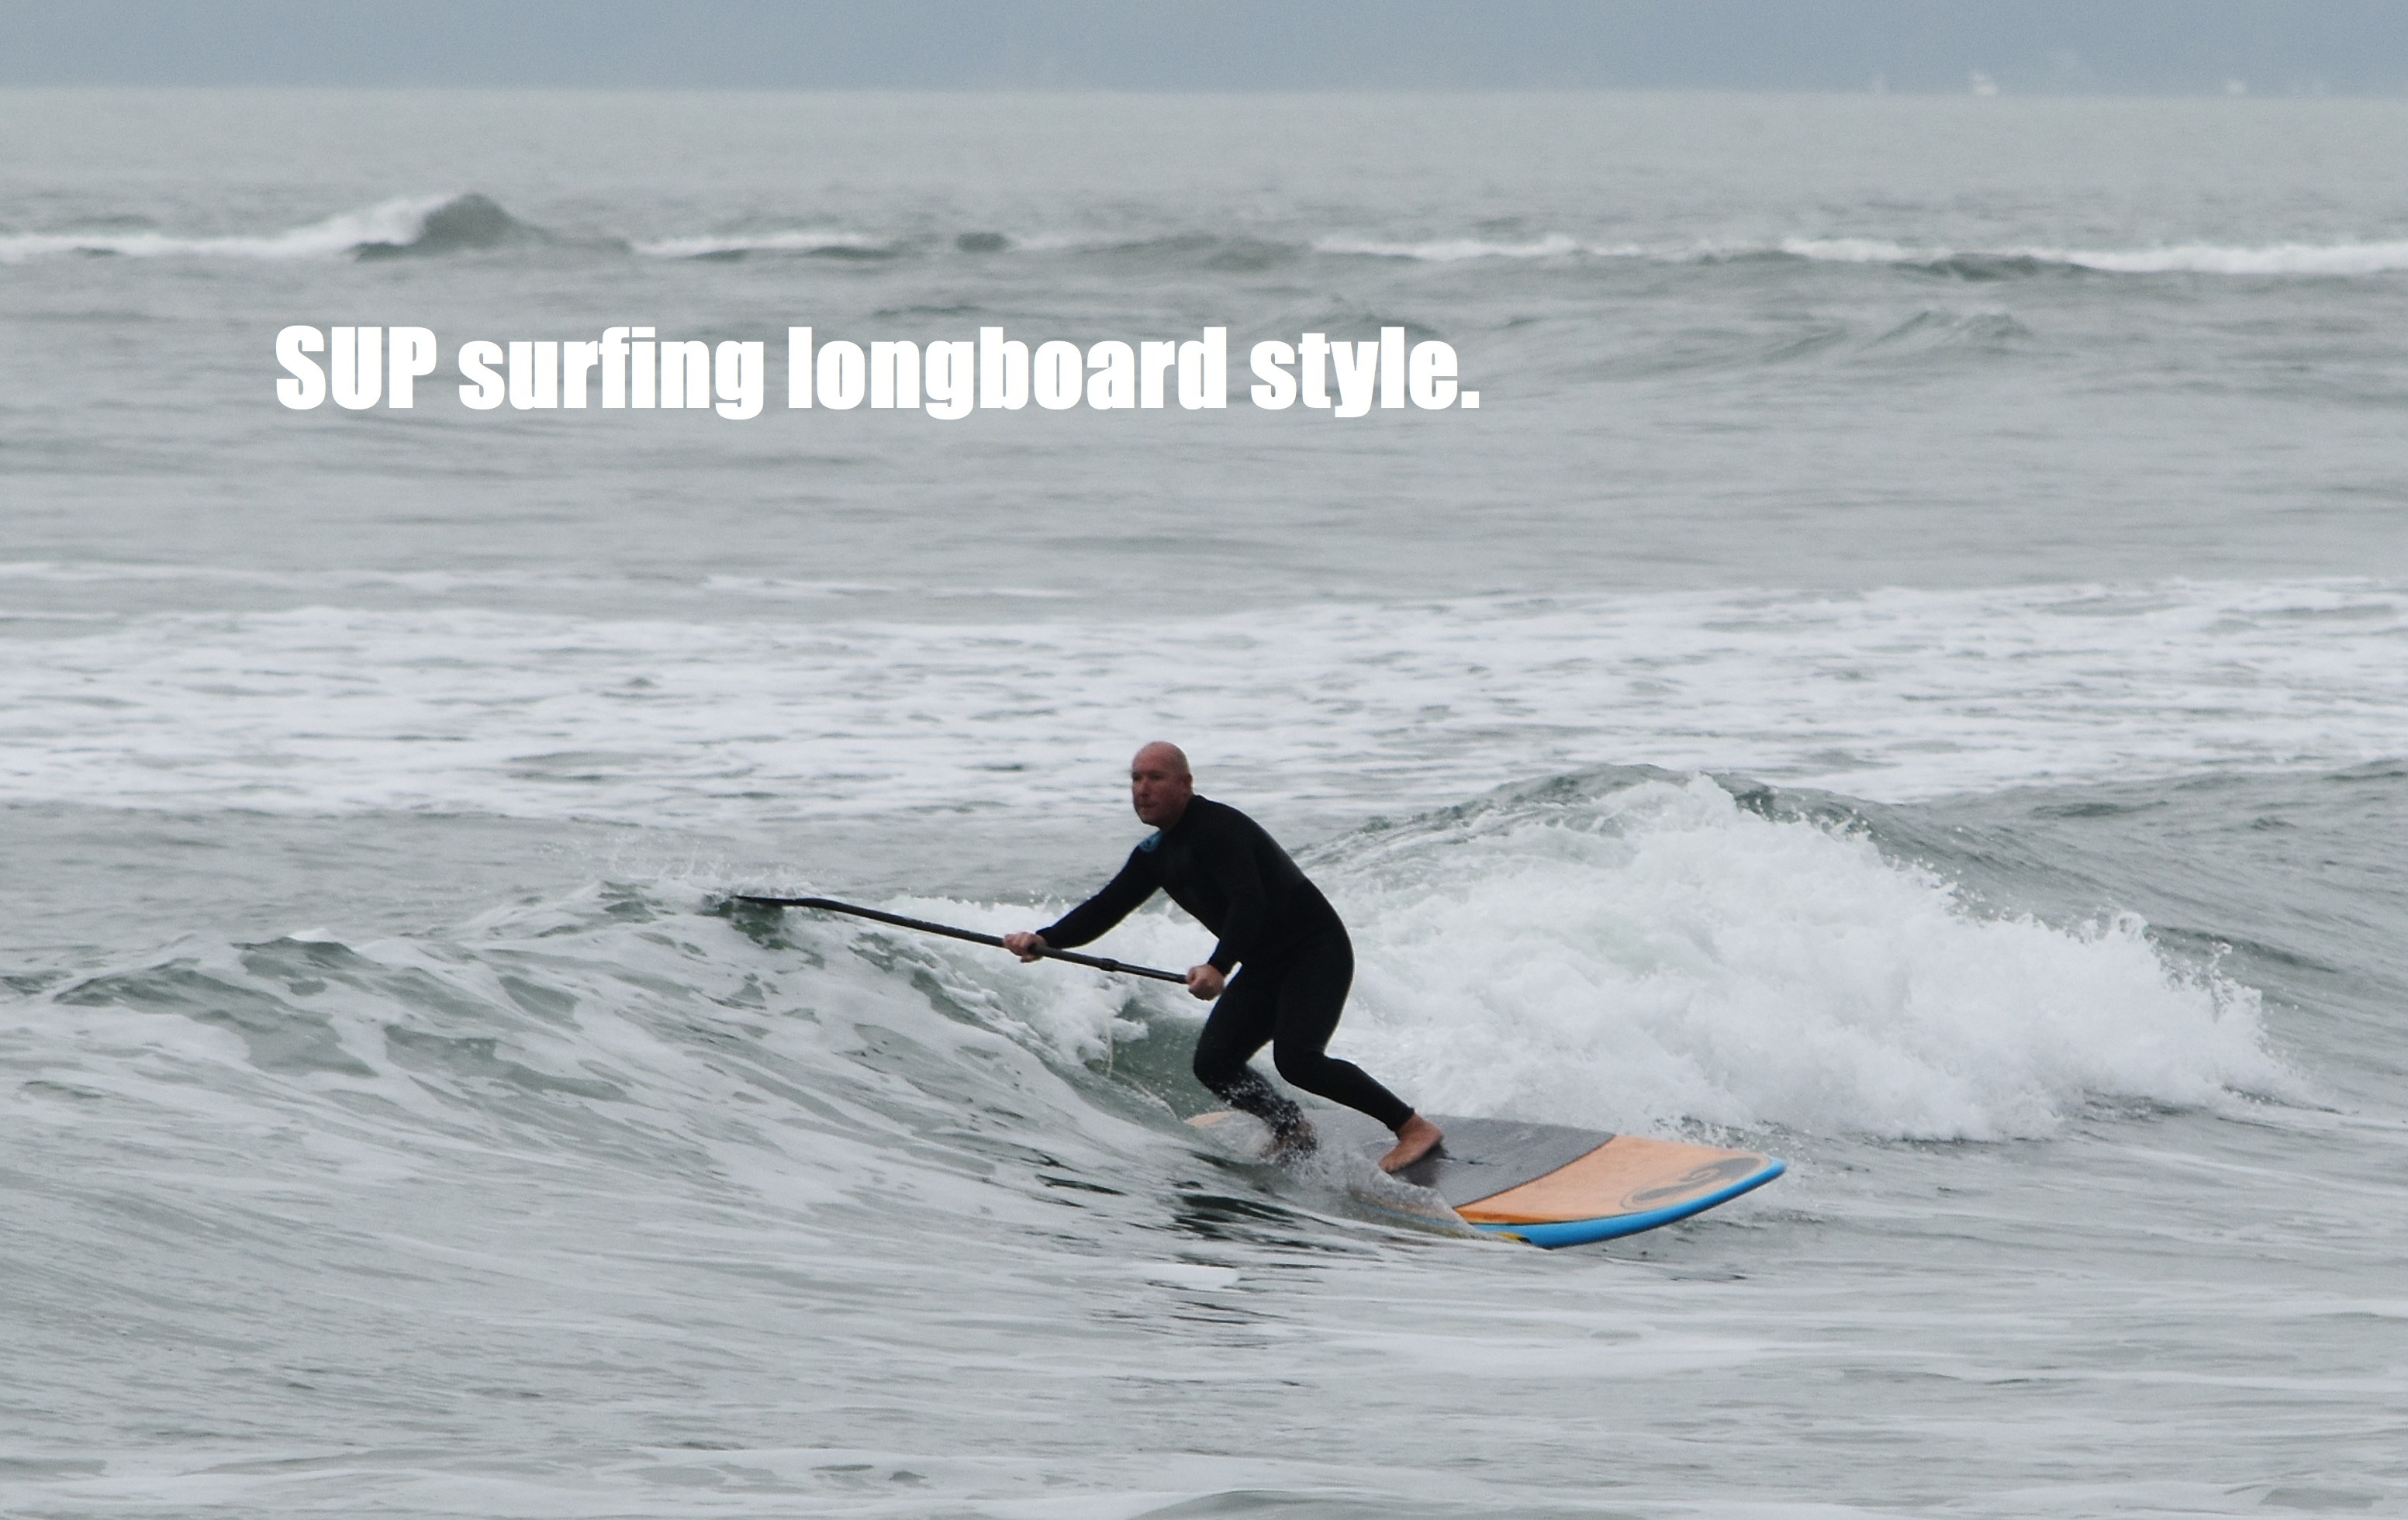 SUP surfing longboard style.